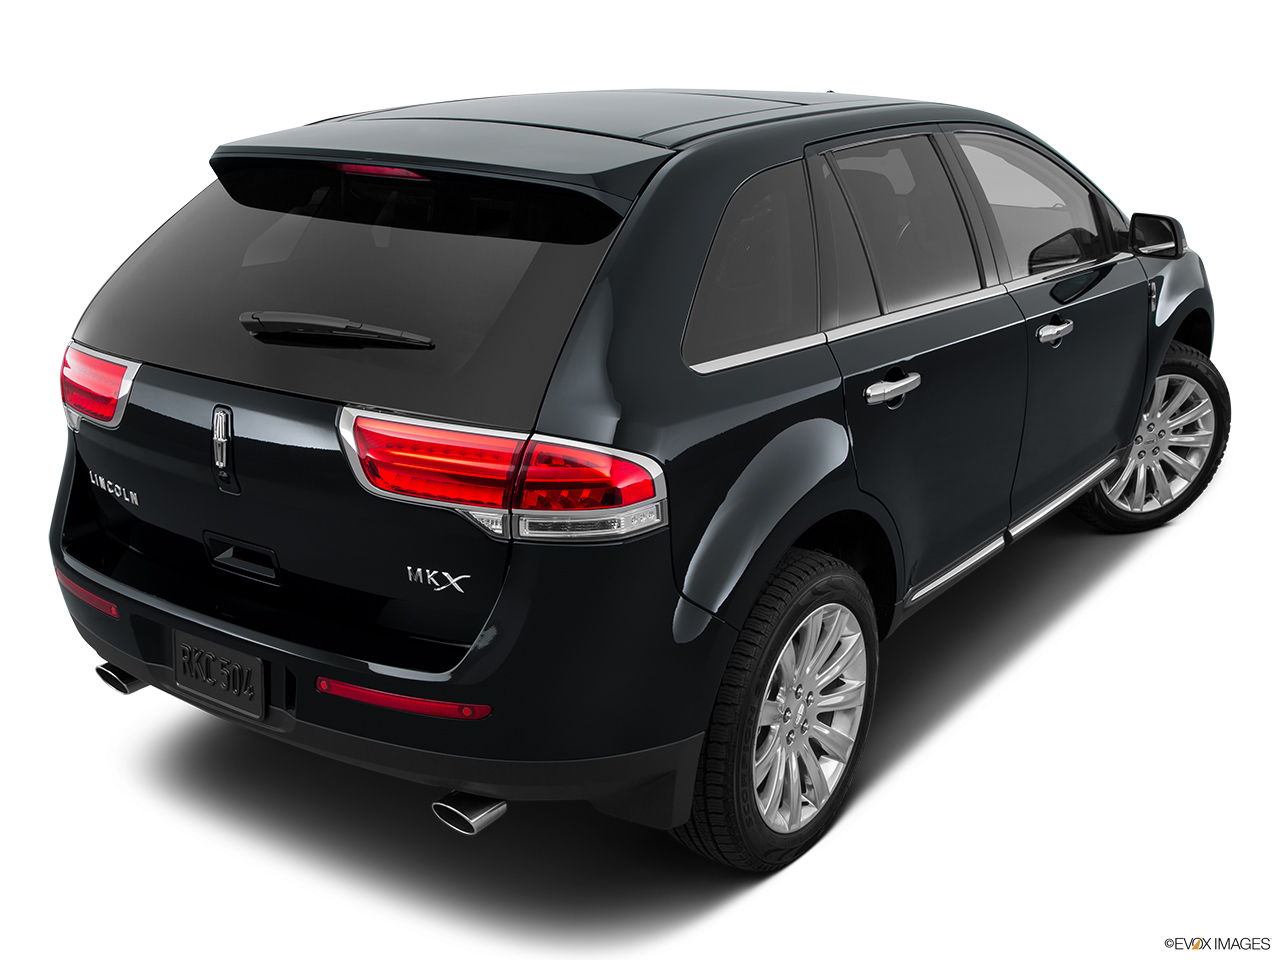 2015 Lincoln MKX FWD Rear 3/4 angle view. 